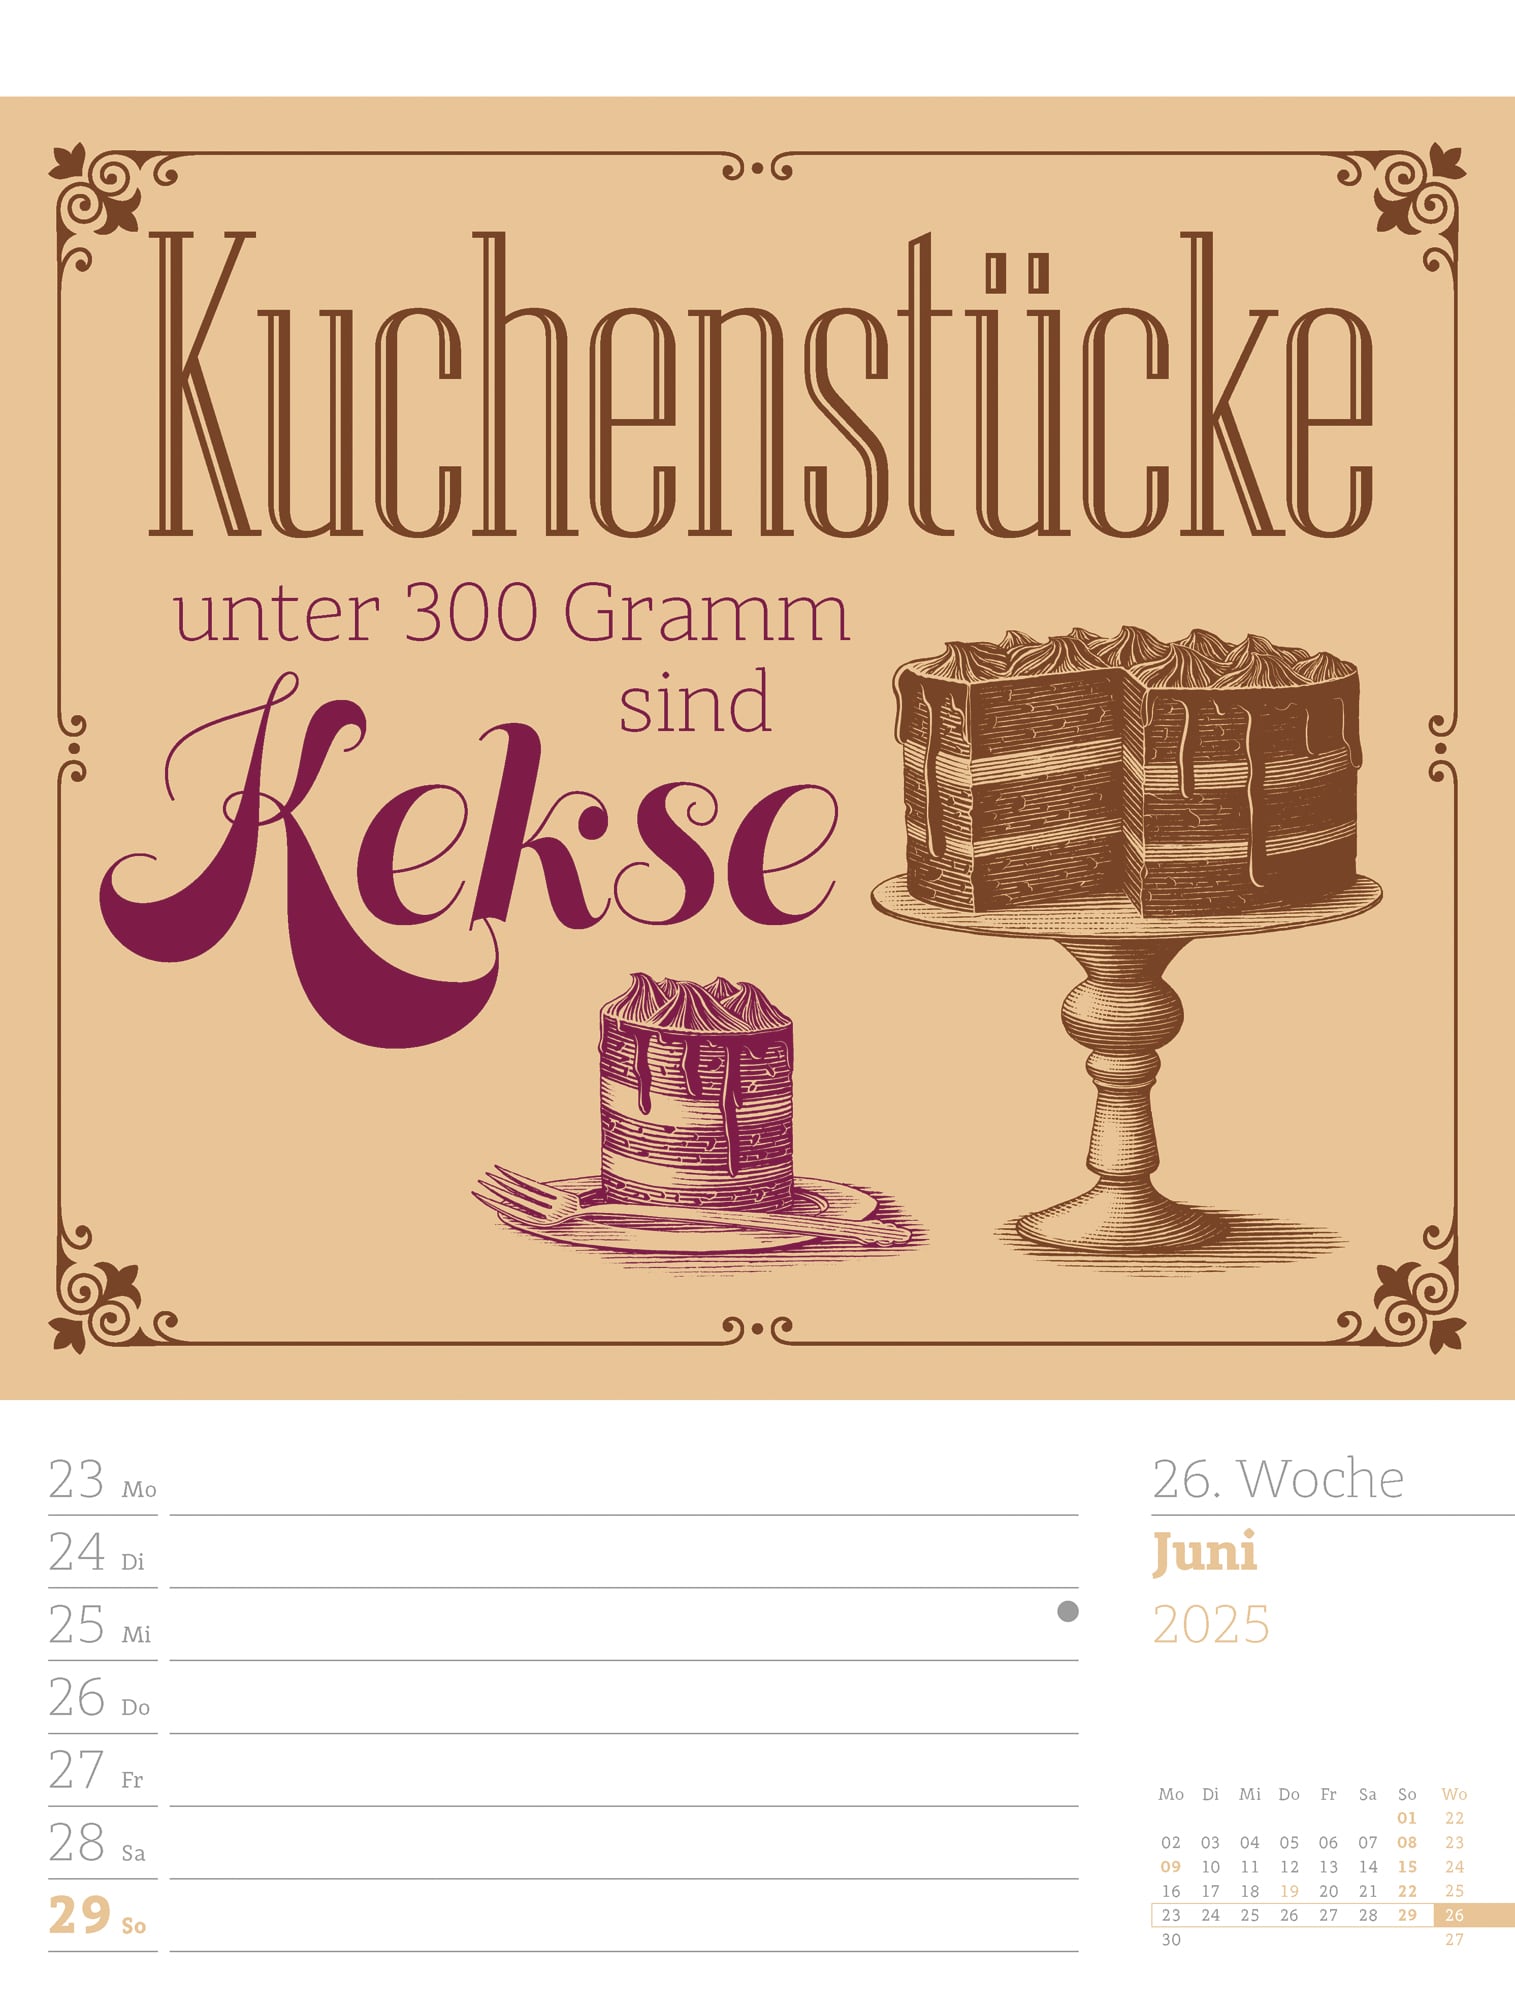 Ackermann Calendar Funny Quotes 2025 - Weekly Planner - Inside View 29